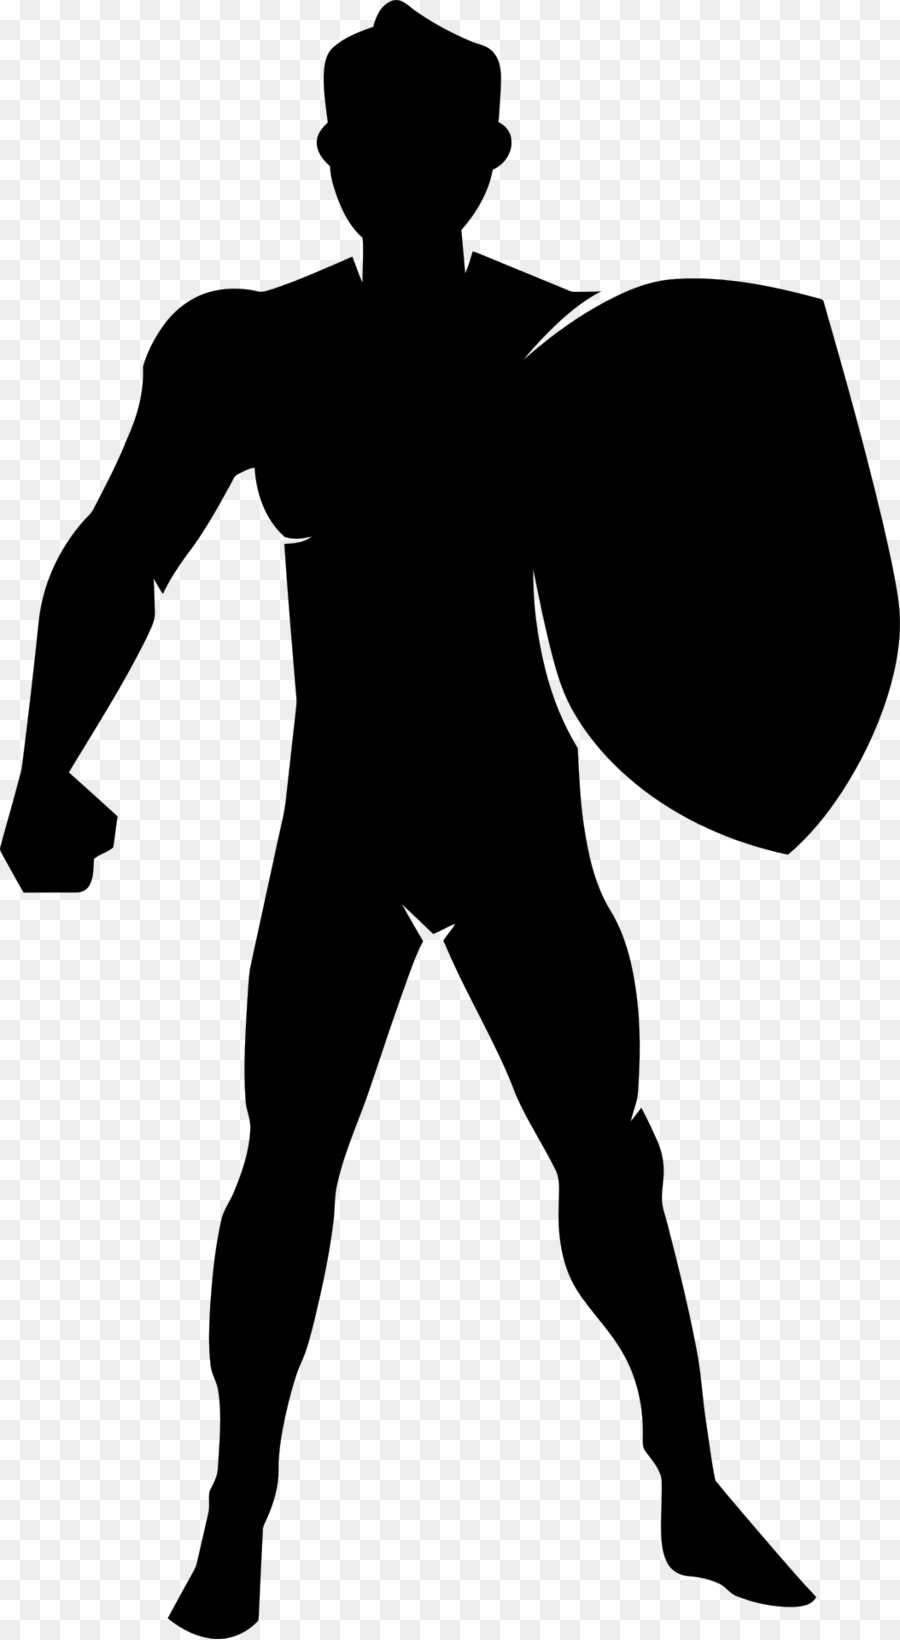 Silhouette Male Clip art - growth mindset png download - 1054*1920 - Free Transparent Silhouette png Download.